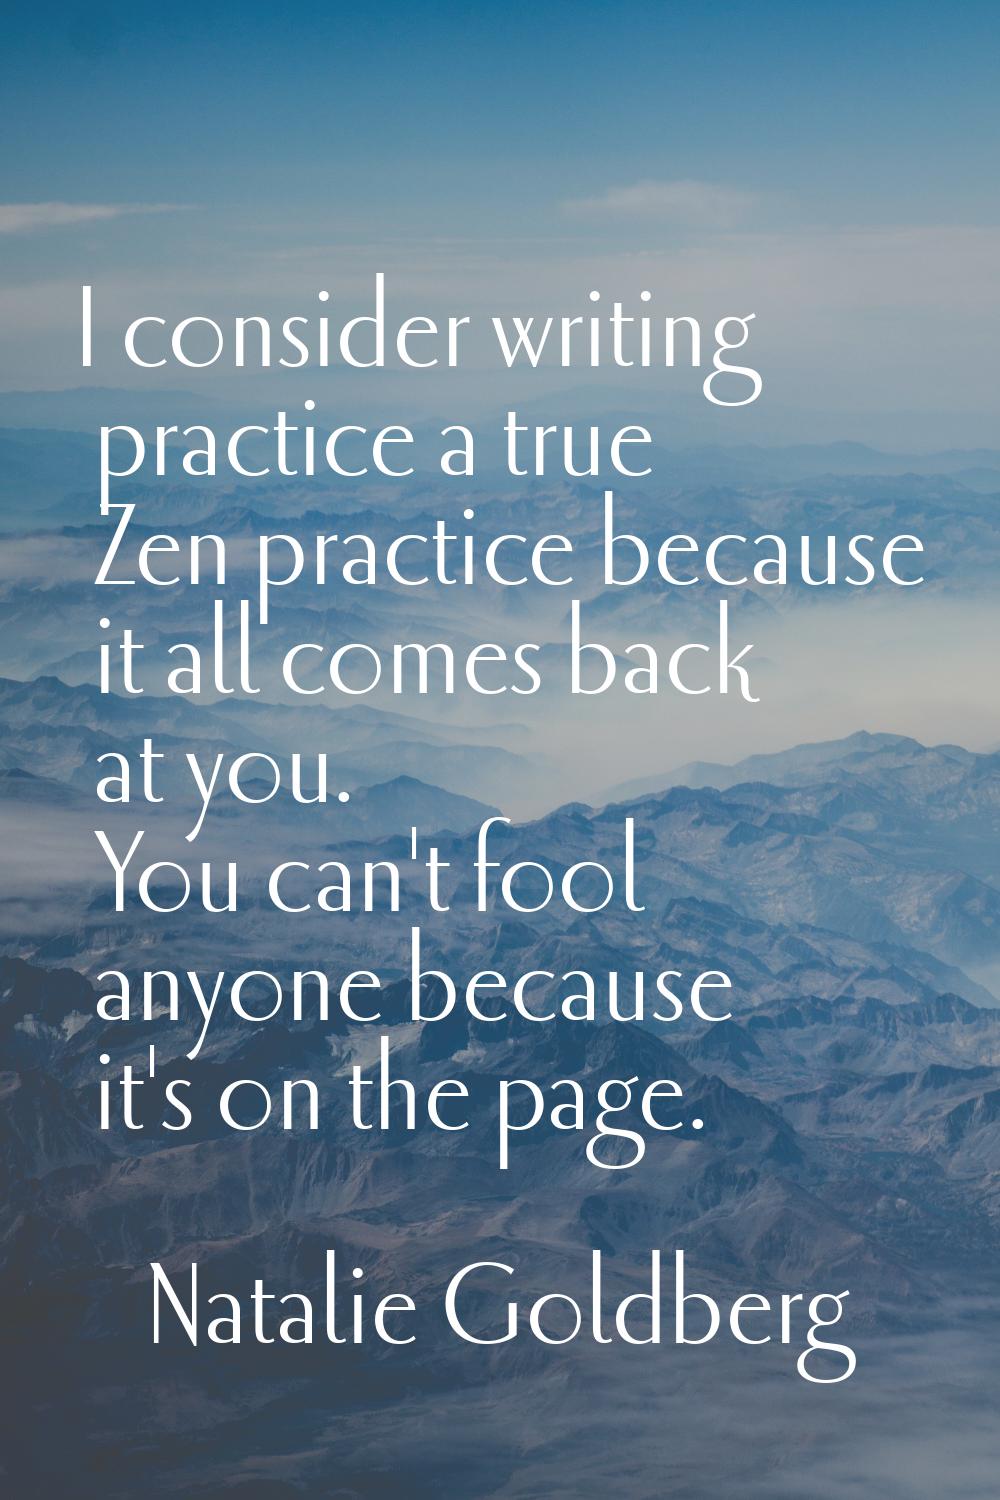 I consider writing practice a true Zen practice because it all comes back at you. You can't fool an